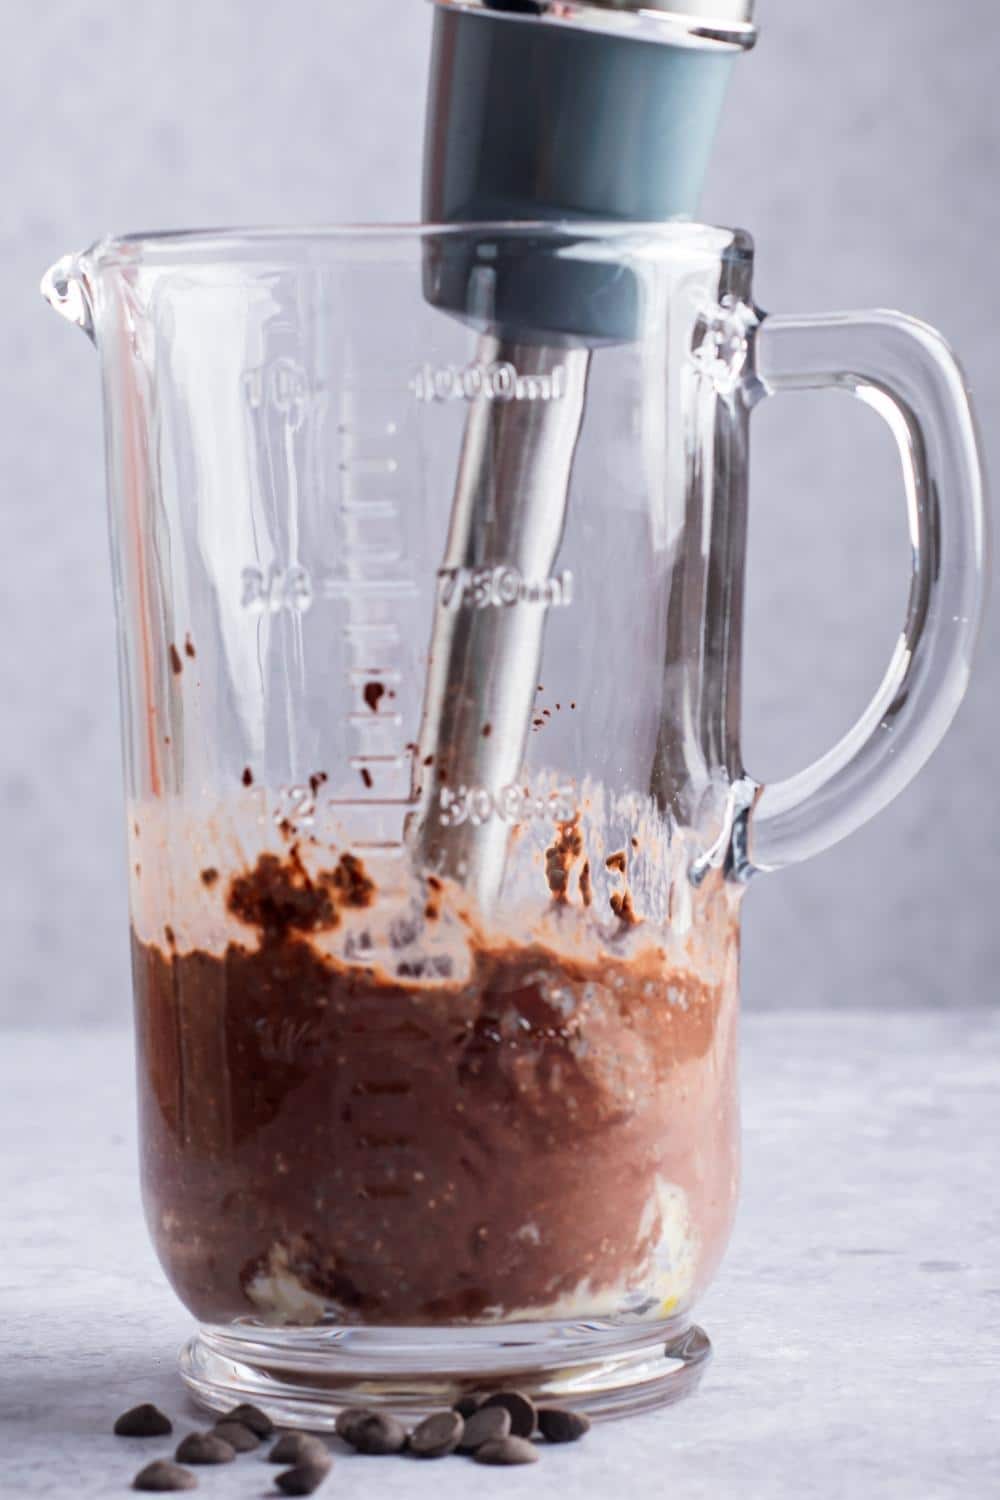 An immersion blender mixing chocolate protein pudding together in a large glass cup.